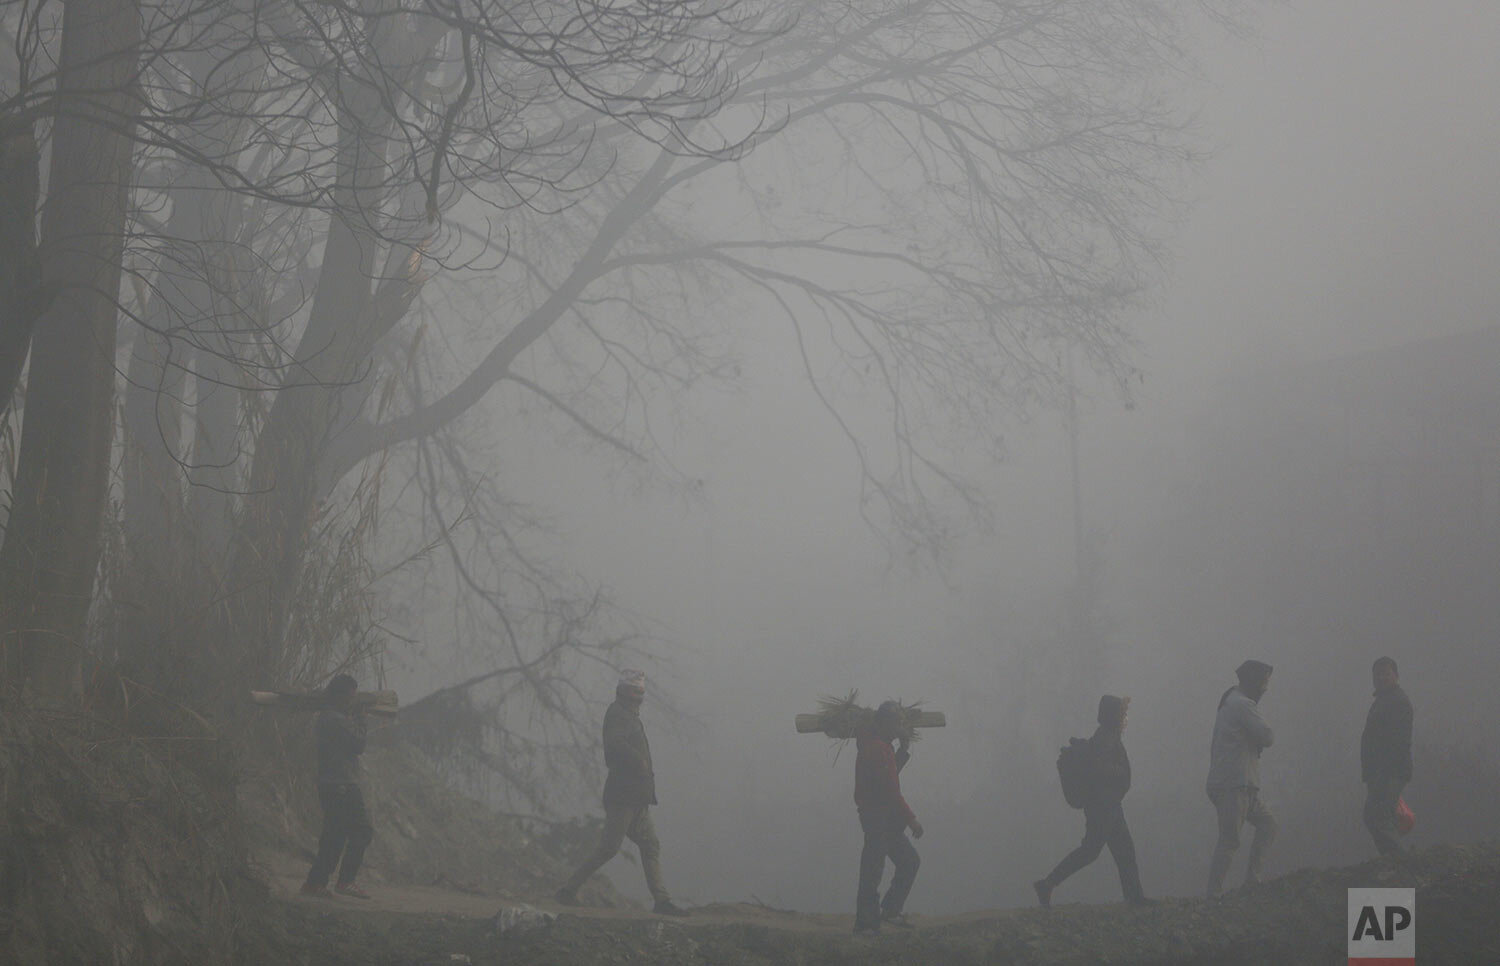  Nepalese men carry logs of wood for a cremation, enveloped in thick morning fog in Bhaktapur, Nepal, Wednesday, Jan. 15, 2020. (AP Photo/Niranjan Shrestha) 